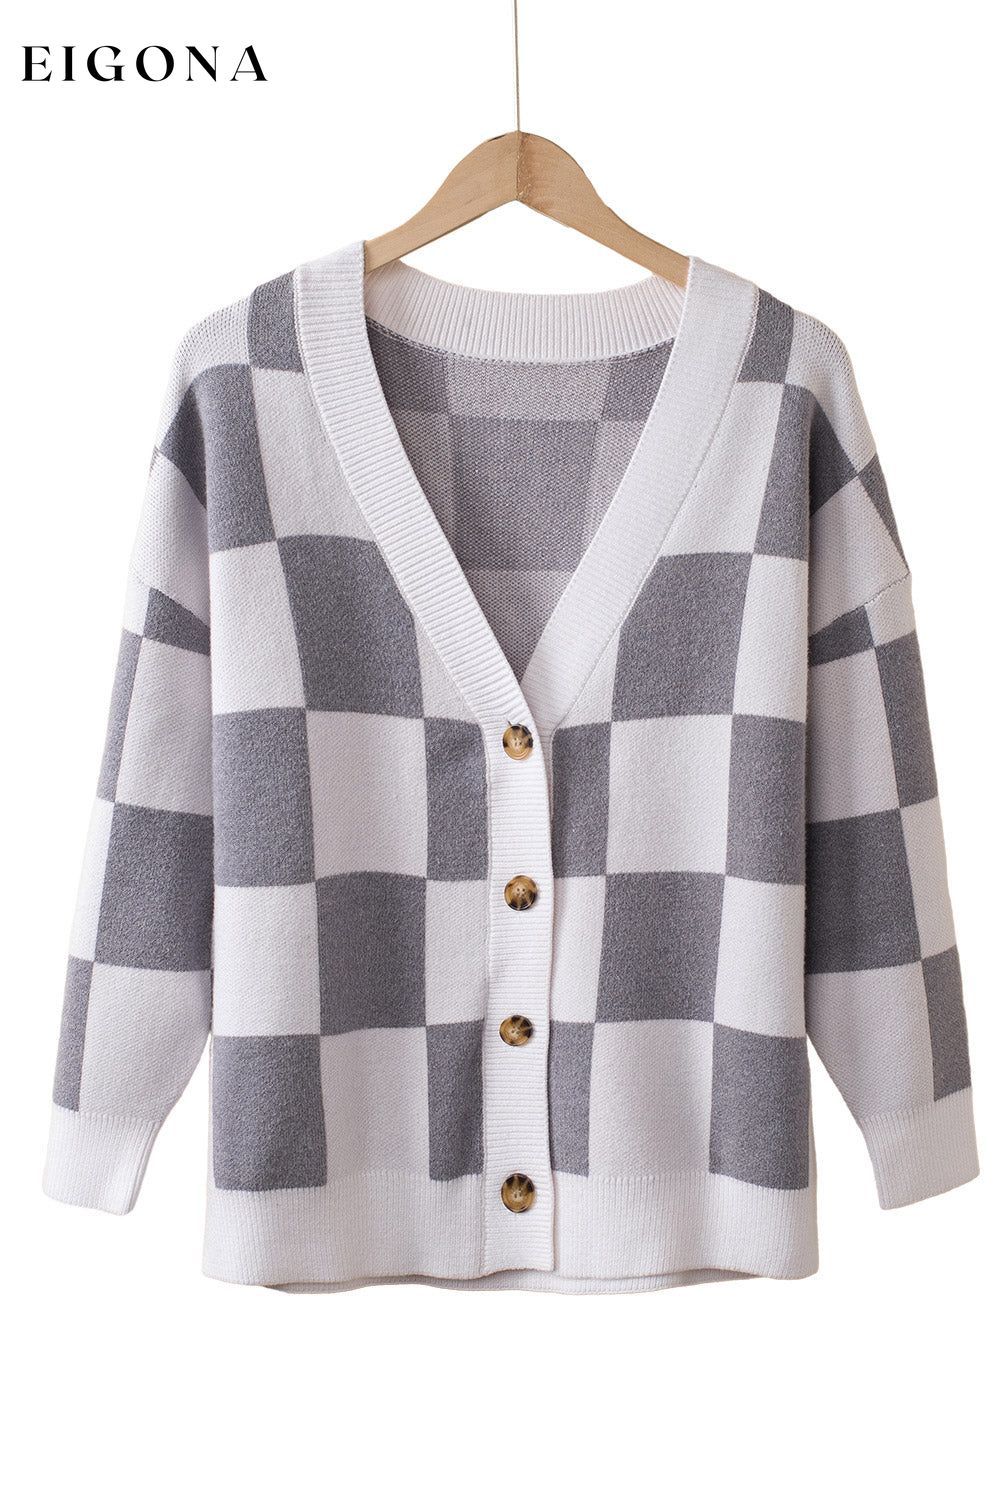 Gray Contrast Checkered Print Button Up Sweater Cardigan All In Stock Best Sellers clothes Occasion Daily Print Color Block Season Winter Style Southern Belle sweater sweaters